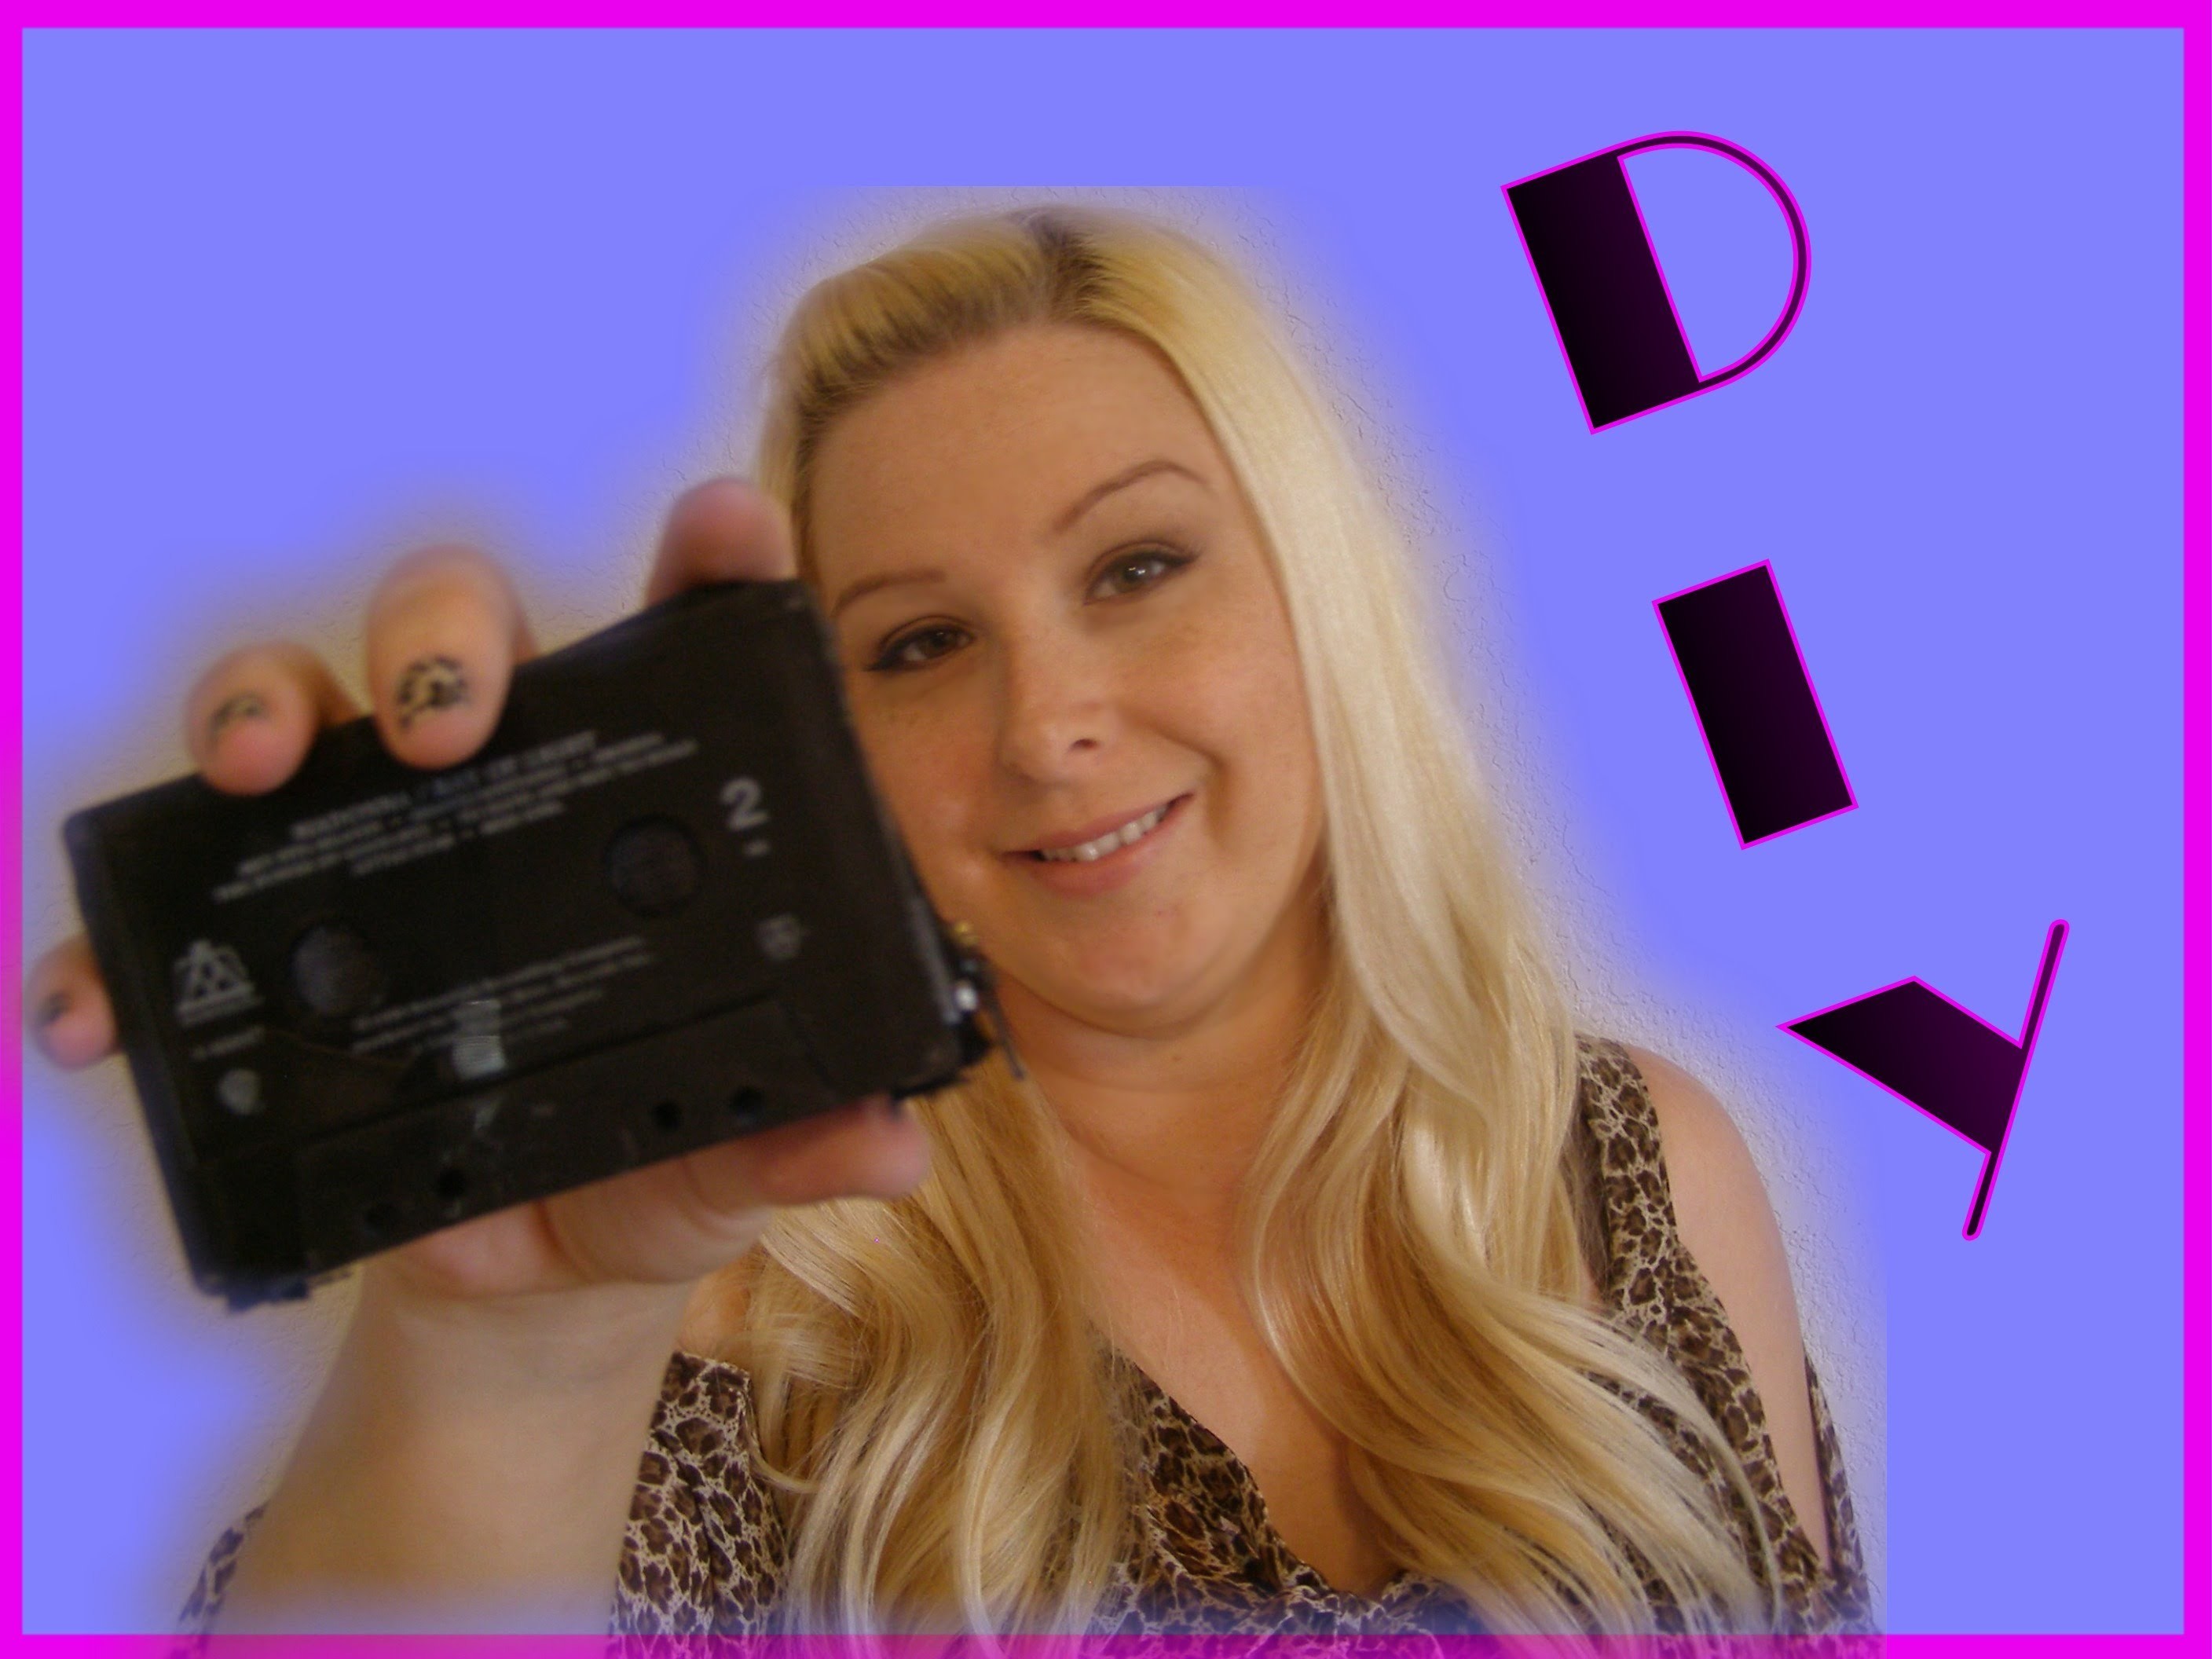 DIY Accessories - How To Make A Cassette Tape Wallet Coin Purse